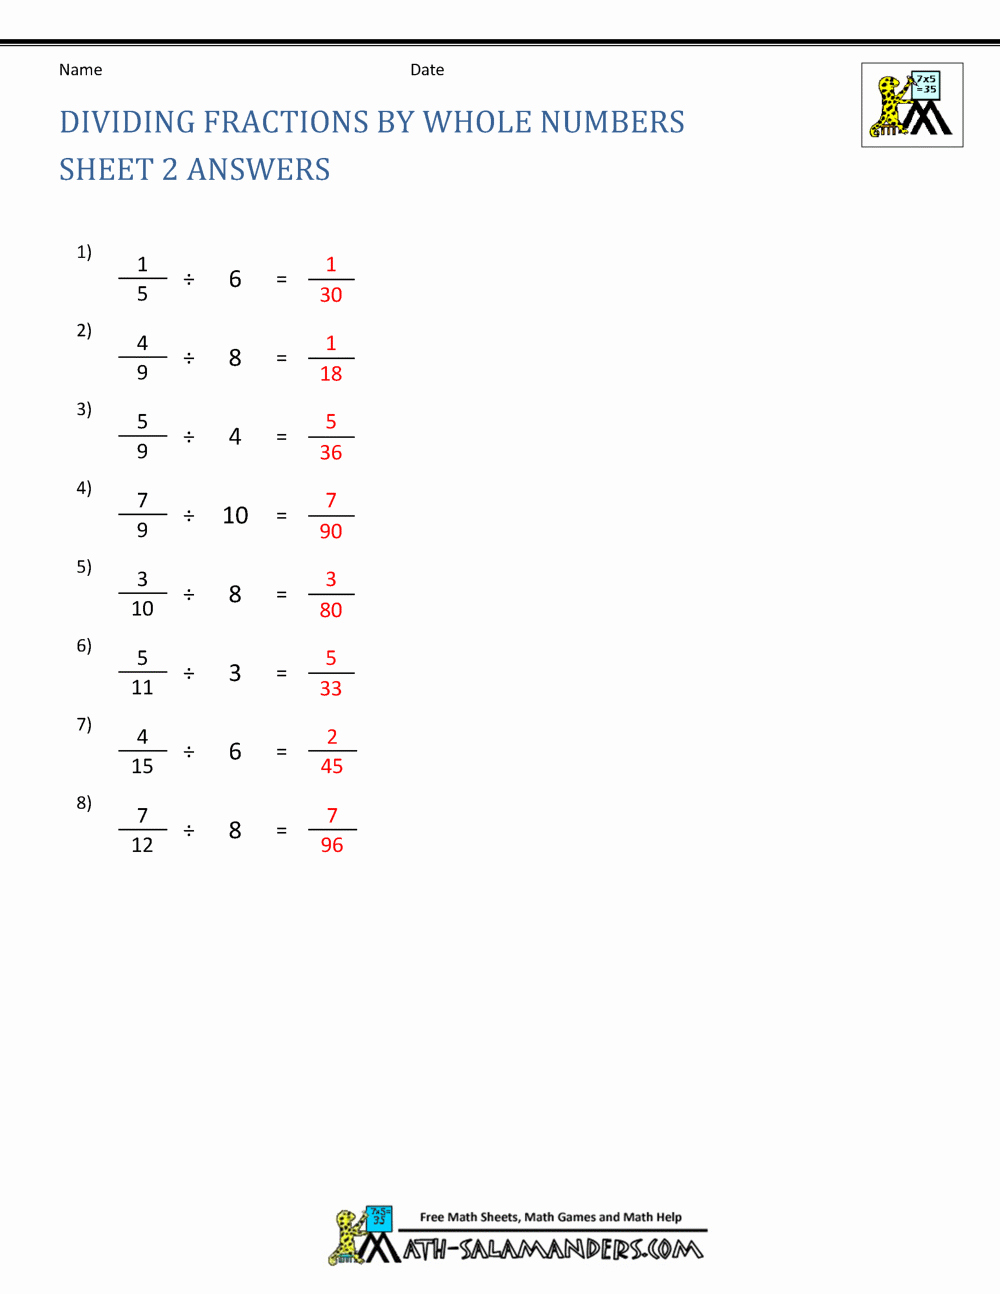 Dividing Fractions Worksheet Pdf Luxury Dividing Fractions by whole Numbers